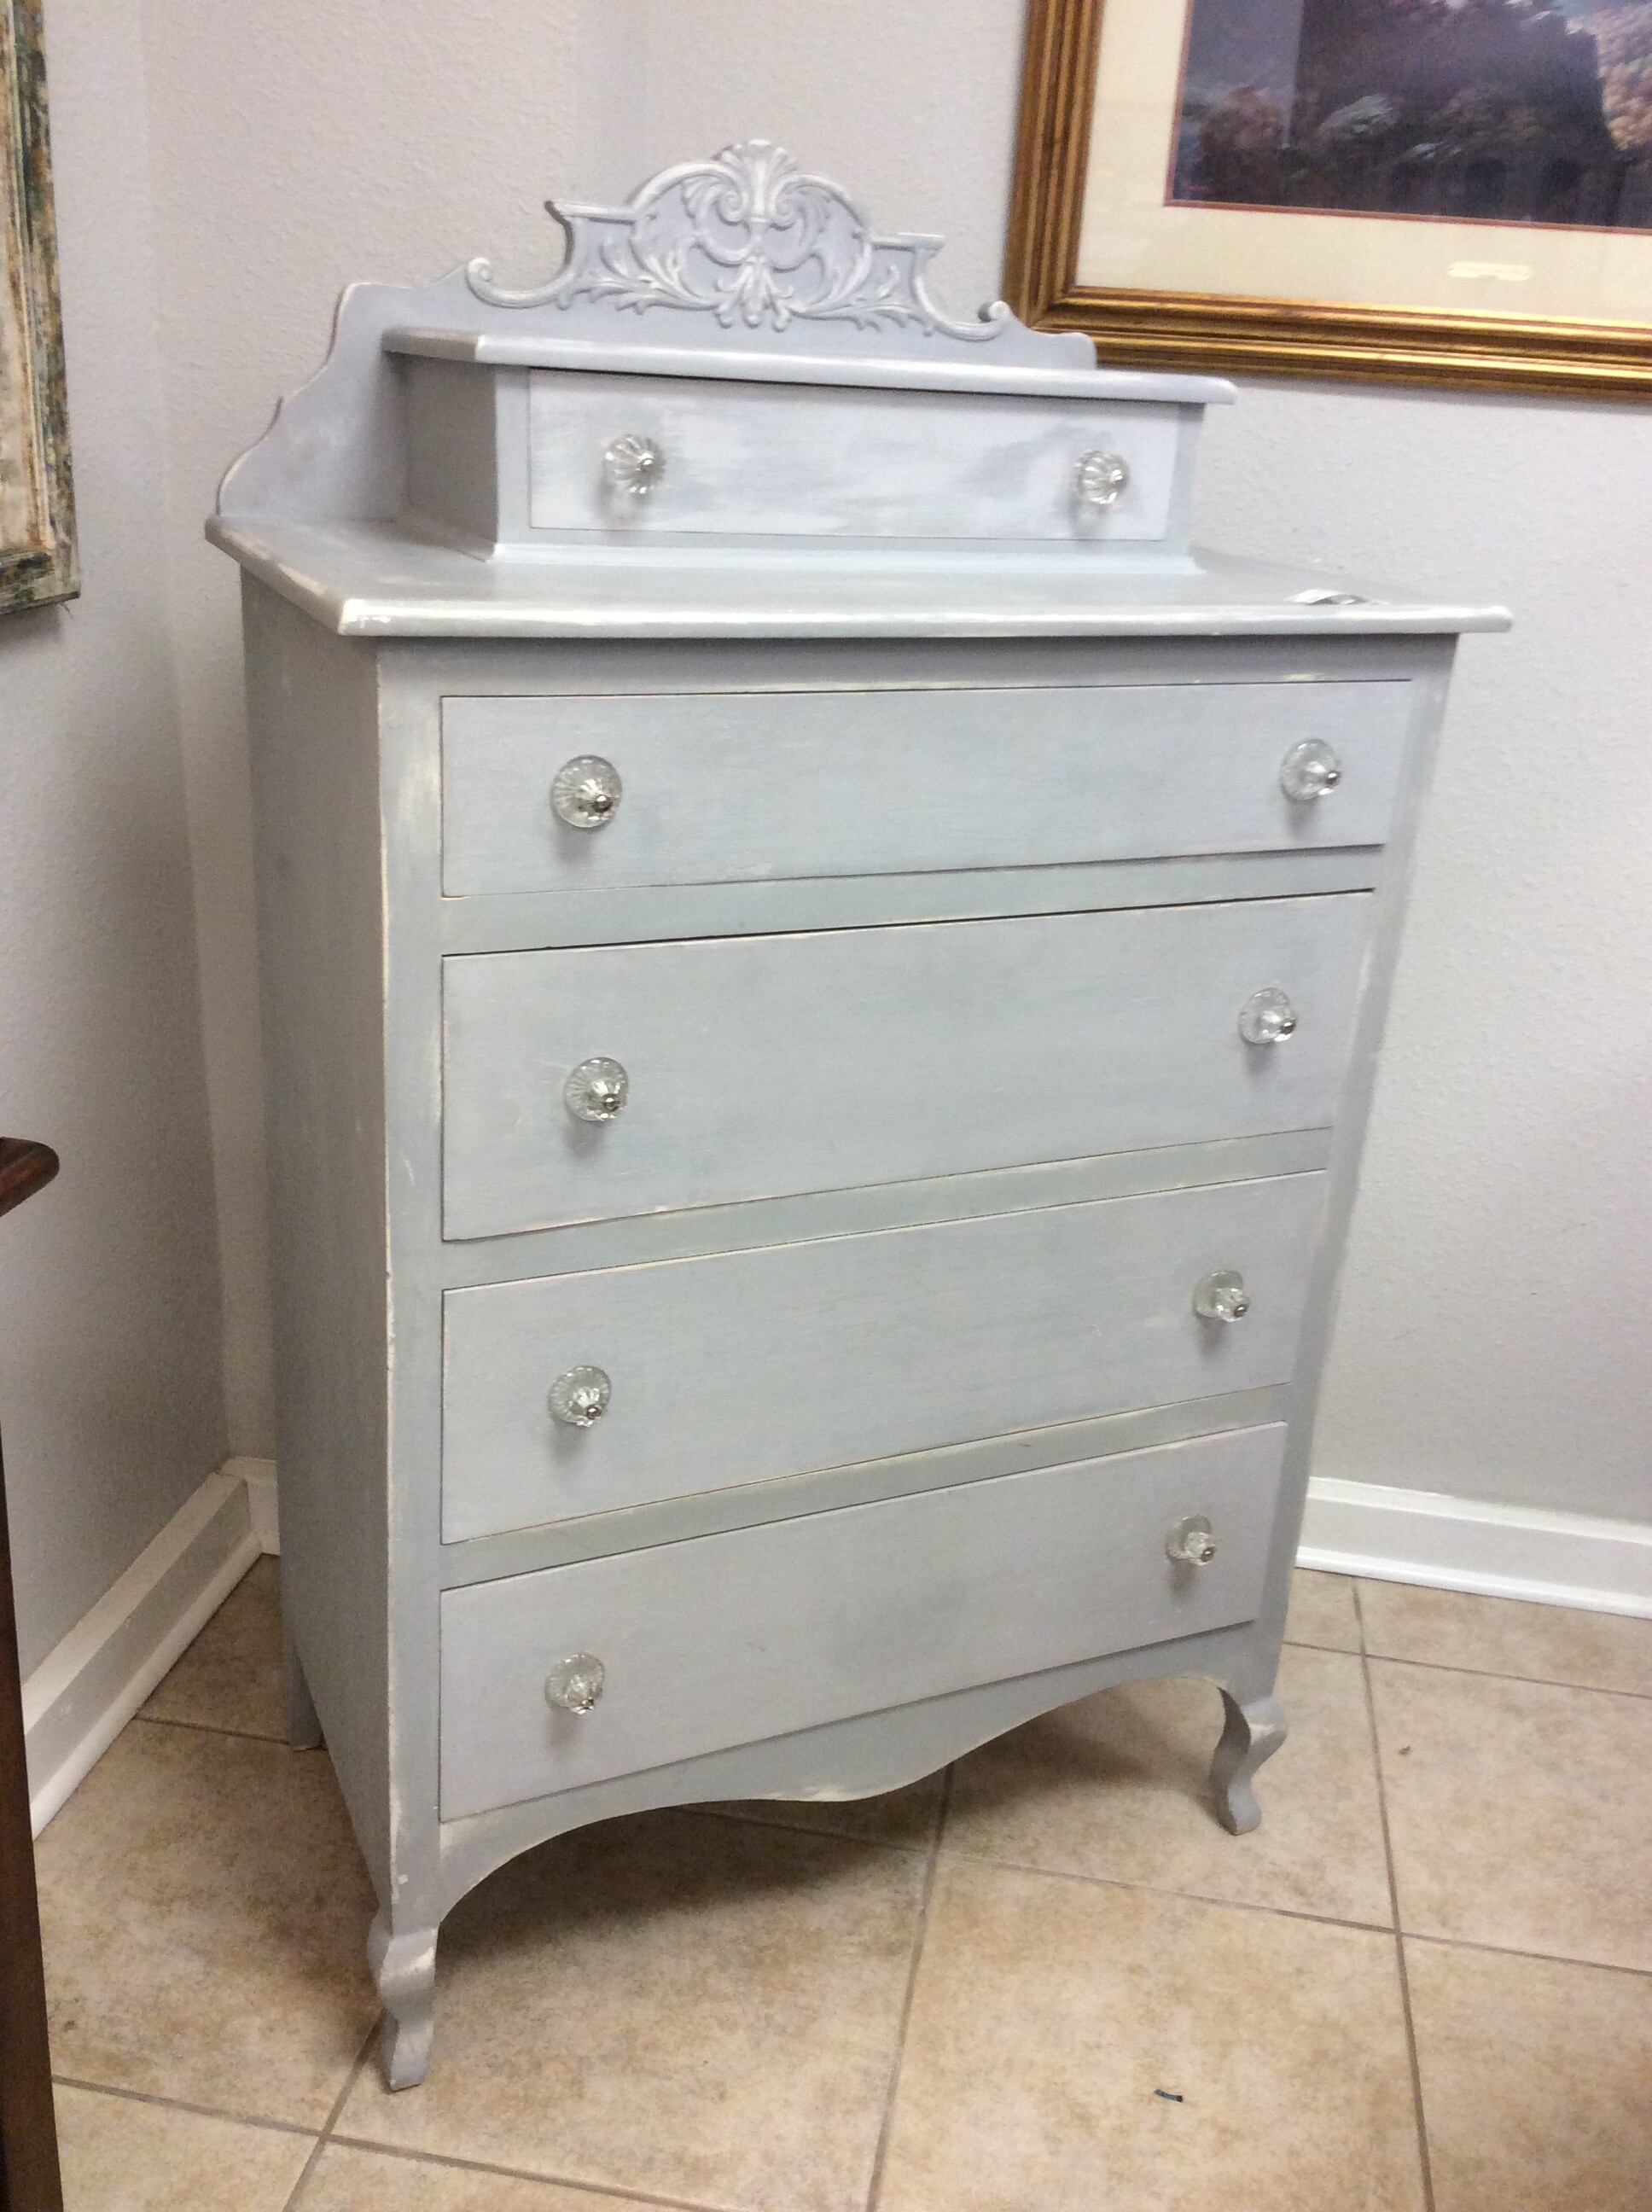 This Shabby Chic dresser has a grey chalk paint finish and glass pulls.